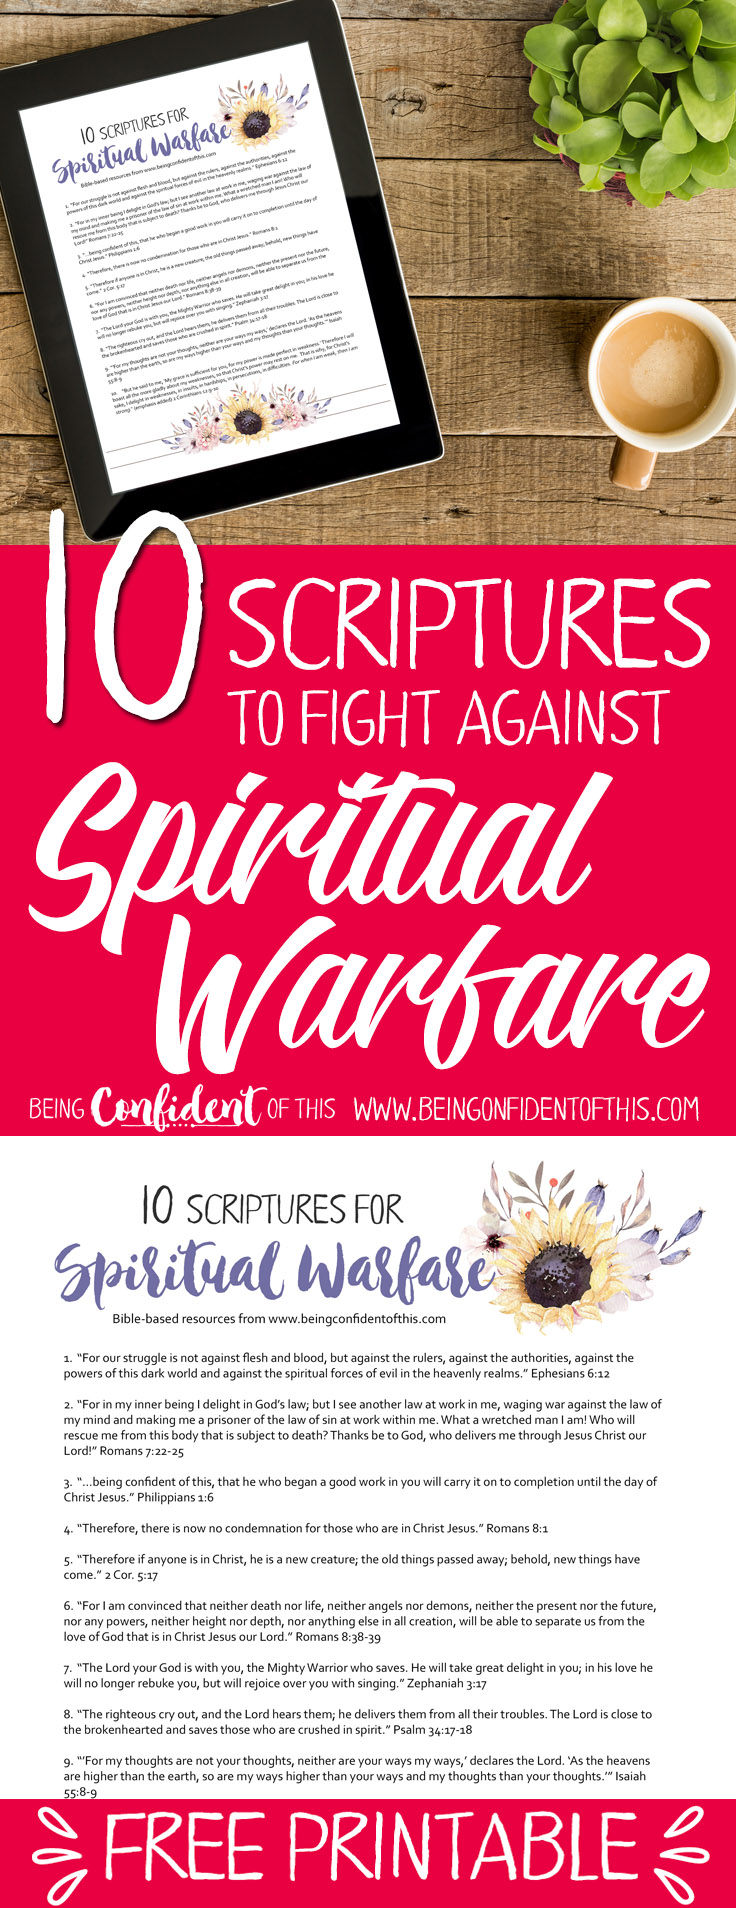 Use these Bible verses to fight back when you experience spiritual warfare. Hang this free printable in a highly visible area as a constant reminder to use your Spiritual Armor! Bible verses|spiritual warfare|fighter verses|encouraging scripture|faith-based resources for women|christian women|free printables| Bible study |devotionals | help for discouraged women |work-in-progress faith